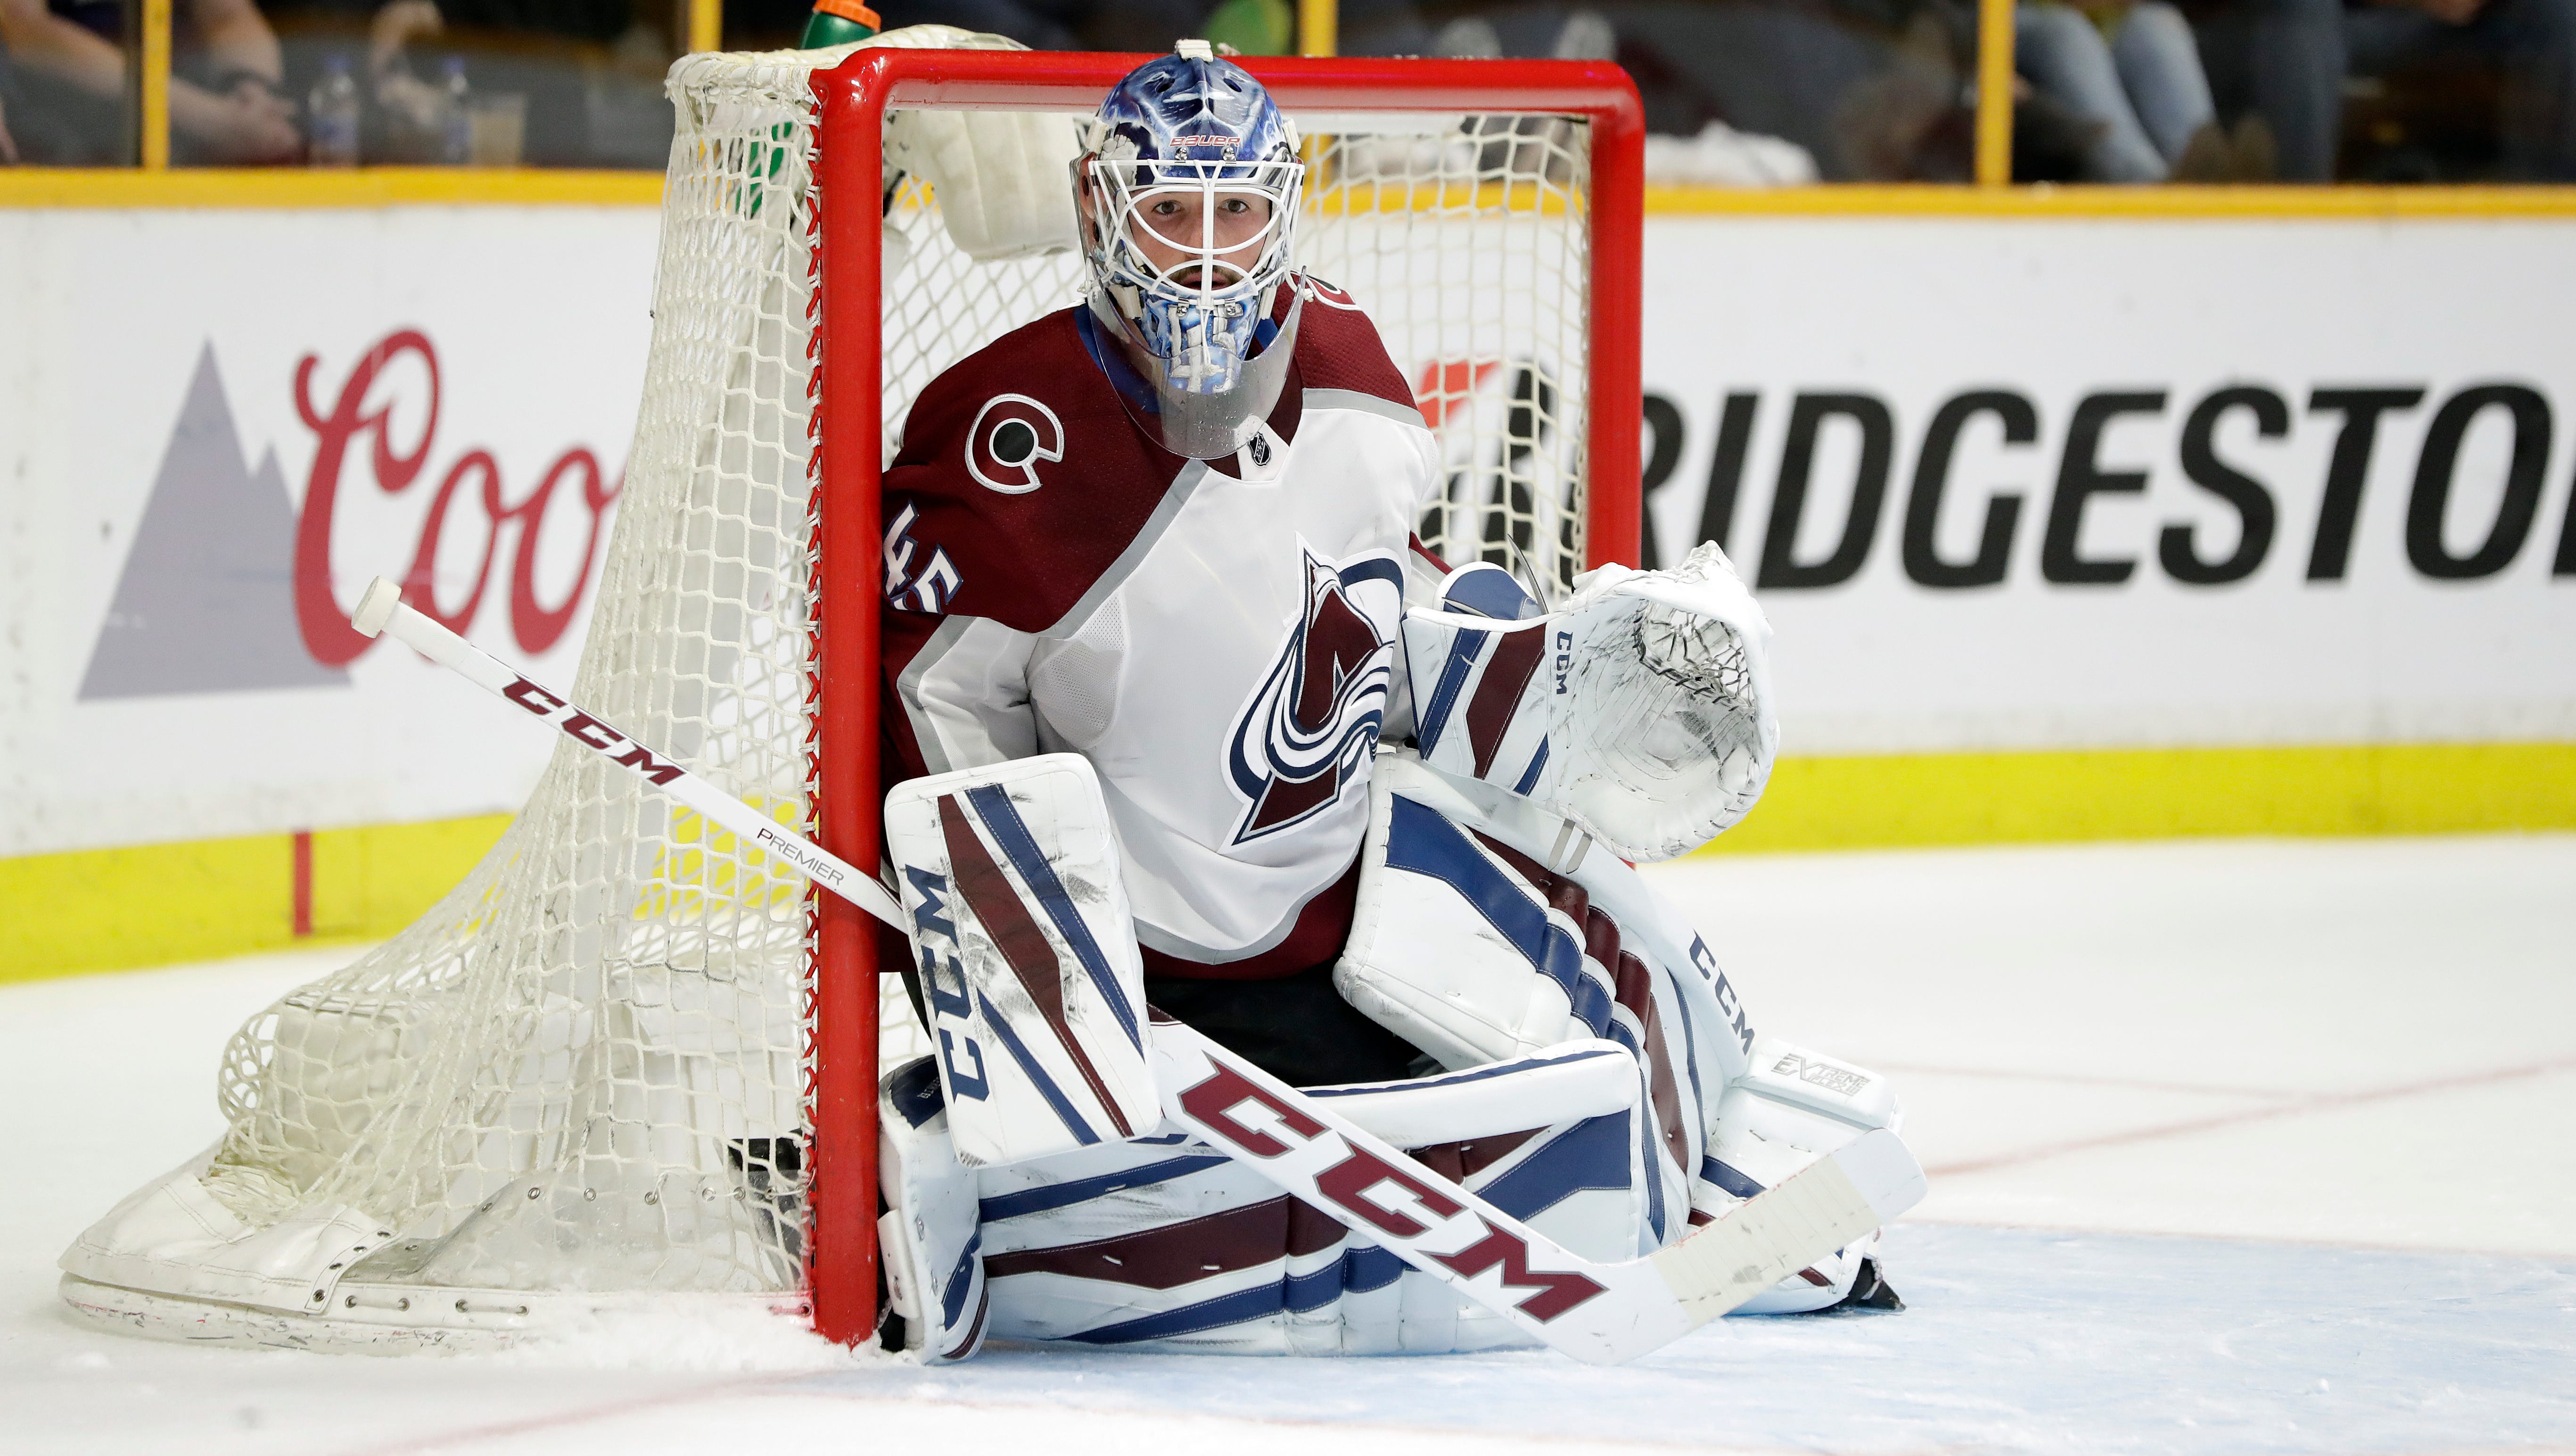 Colorado Avalanche goaltender Jonathan Bernier plays against the Nashville Predators during the second period in Game 2 of a first-round playoff series Saturday, April 14, 2018, in Nashville, Tenn.